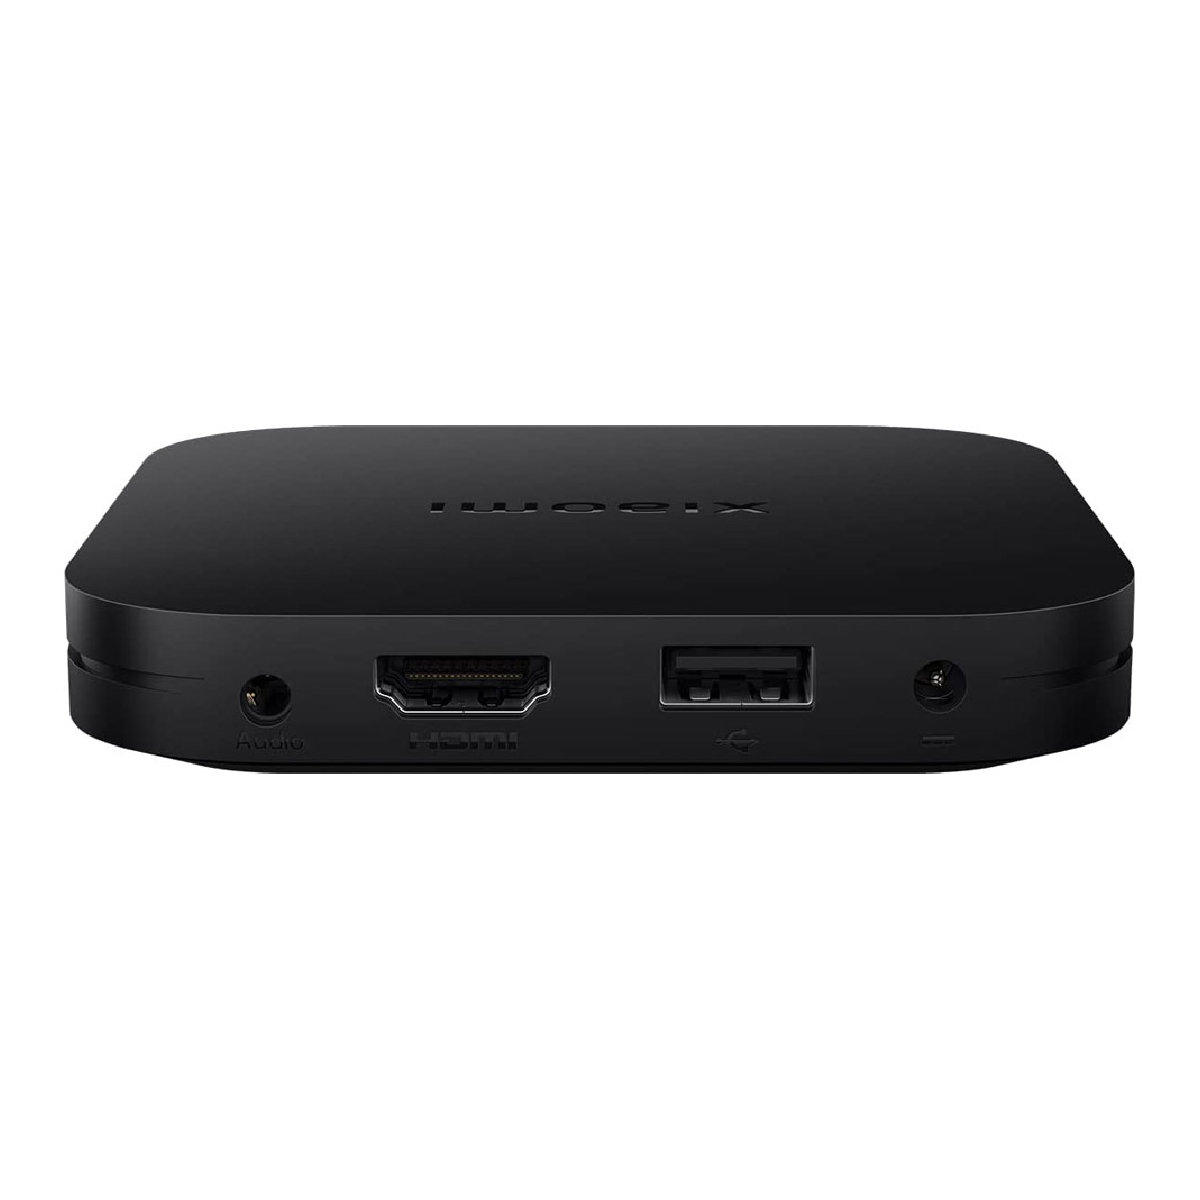 Xiaomi TV Box S (2nd Gen) 4K UHD Android with Google TV - Comprar Magazine